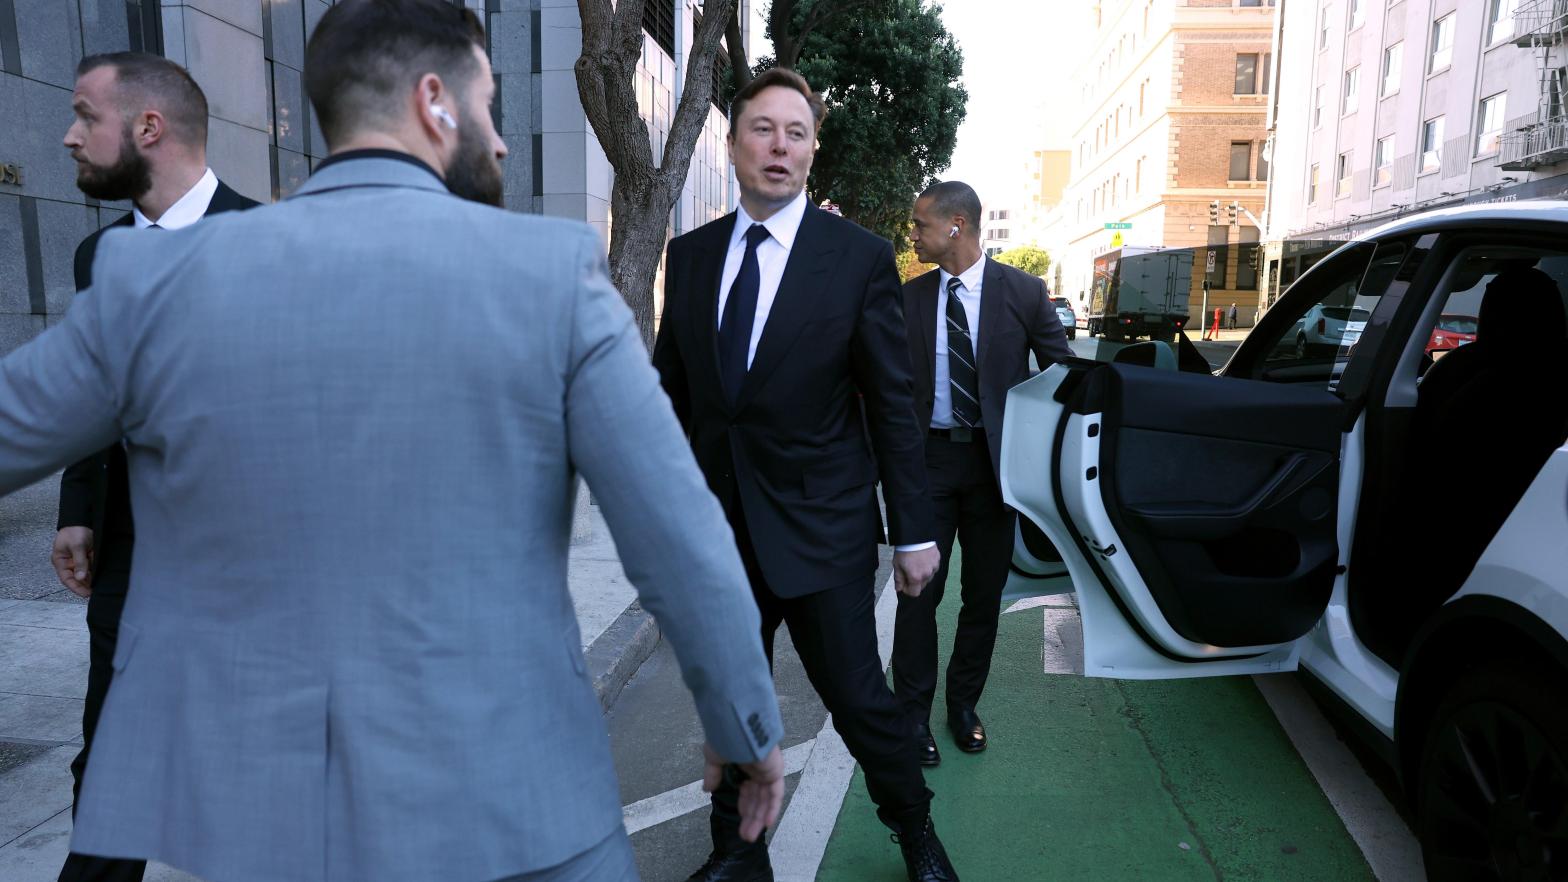 Elon Musk stands by his Tesla car after leaving the courthouse during an ongoing legal dispute surrounding his supposed 2018 plans to take Tesla private. It's just one of many scandals surrounding the company that puts a damper on Tesla's record profits. (Photo: Justin Sullivan, Getty Images)